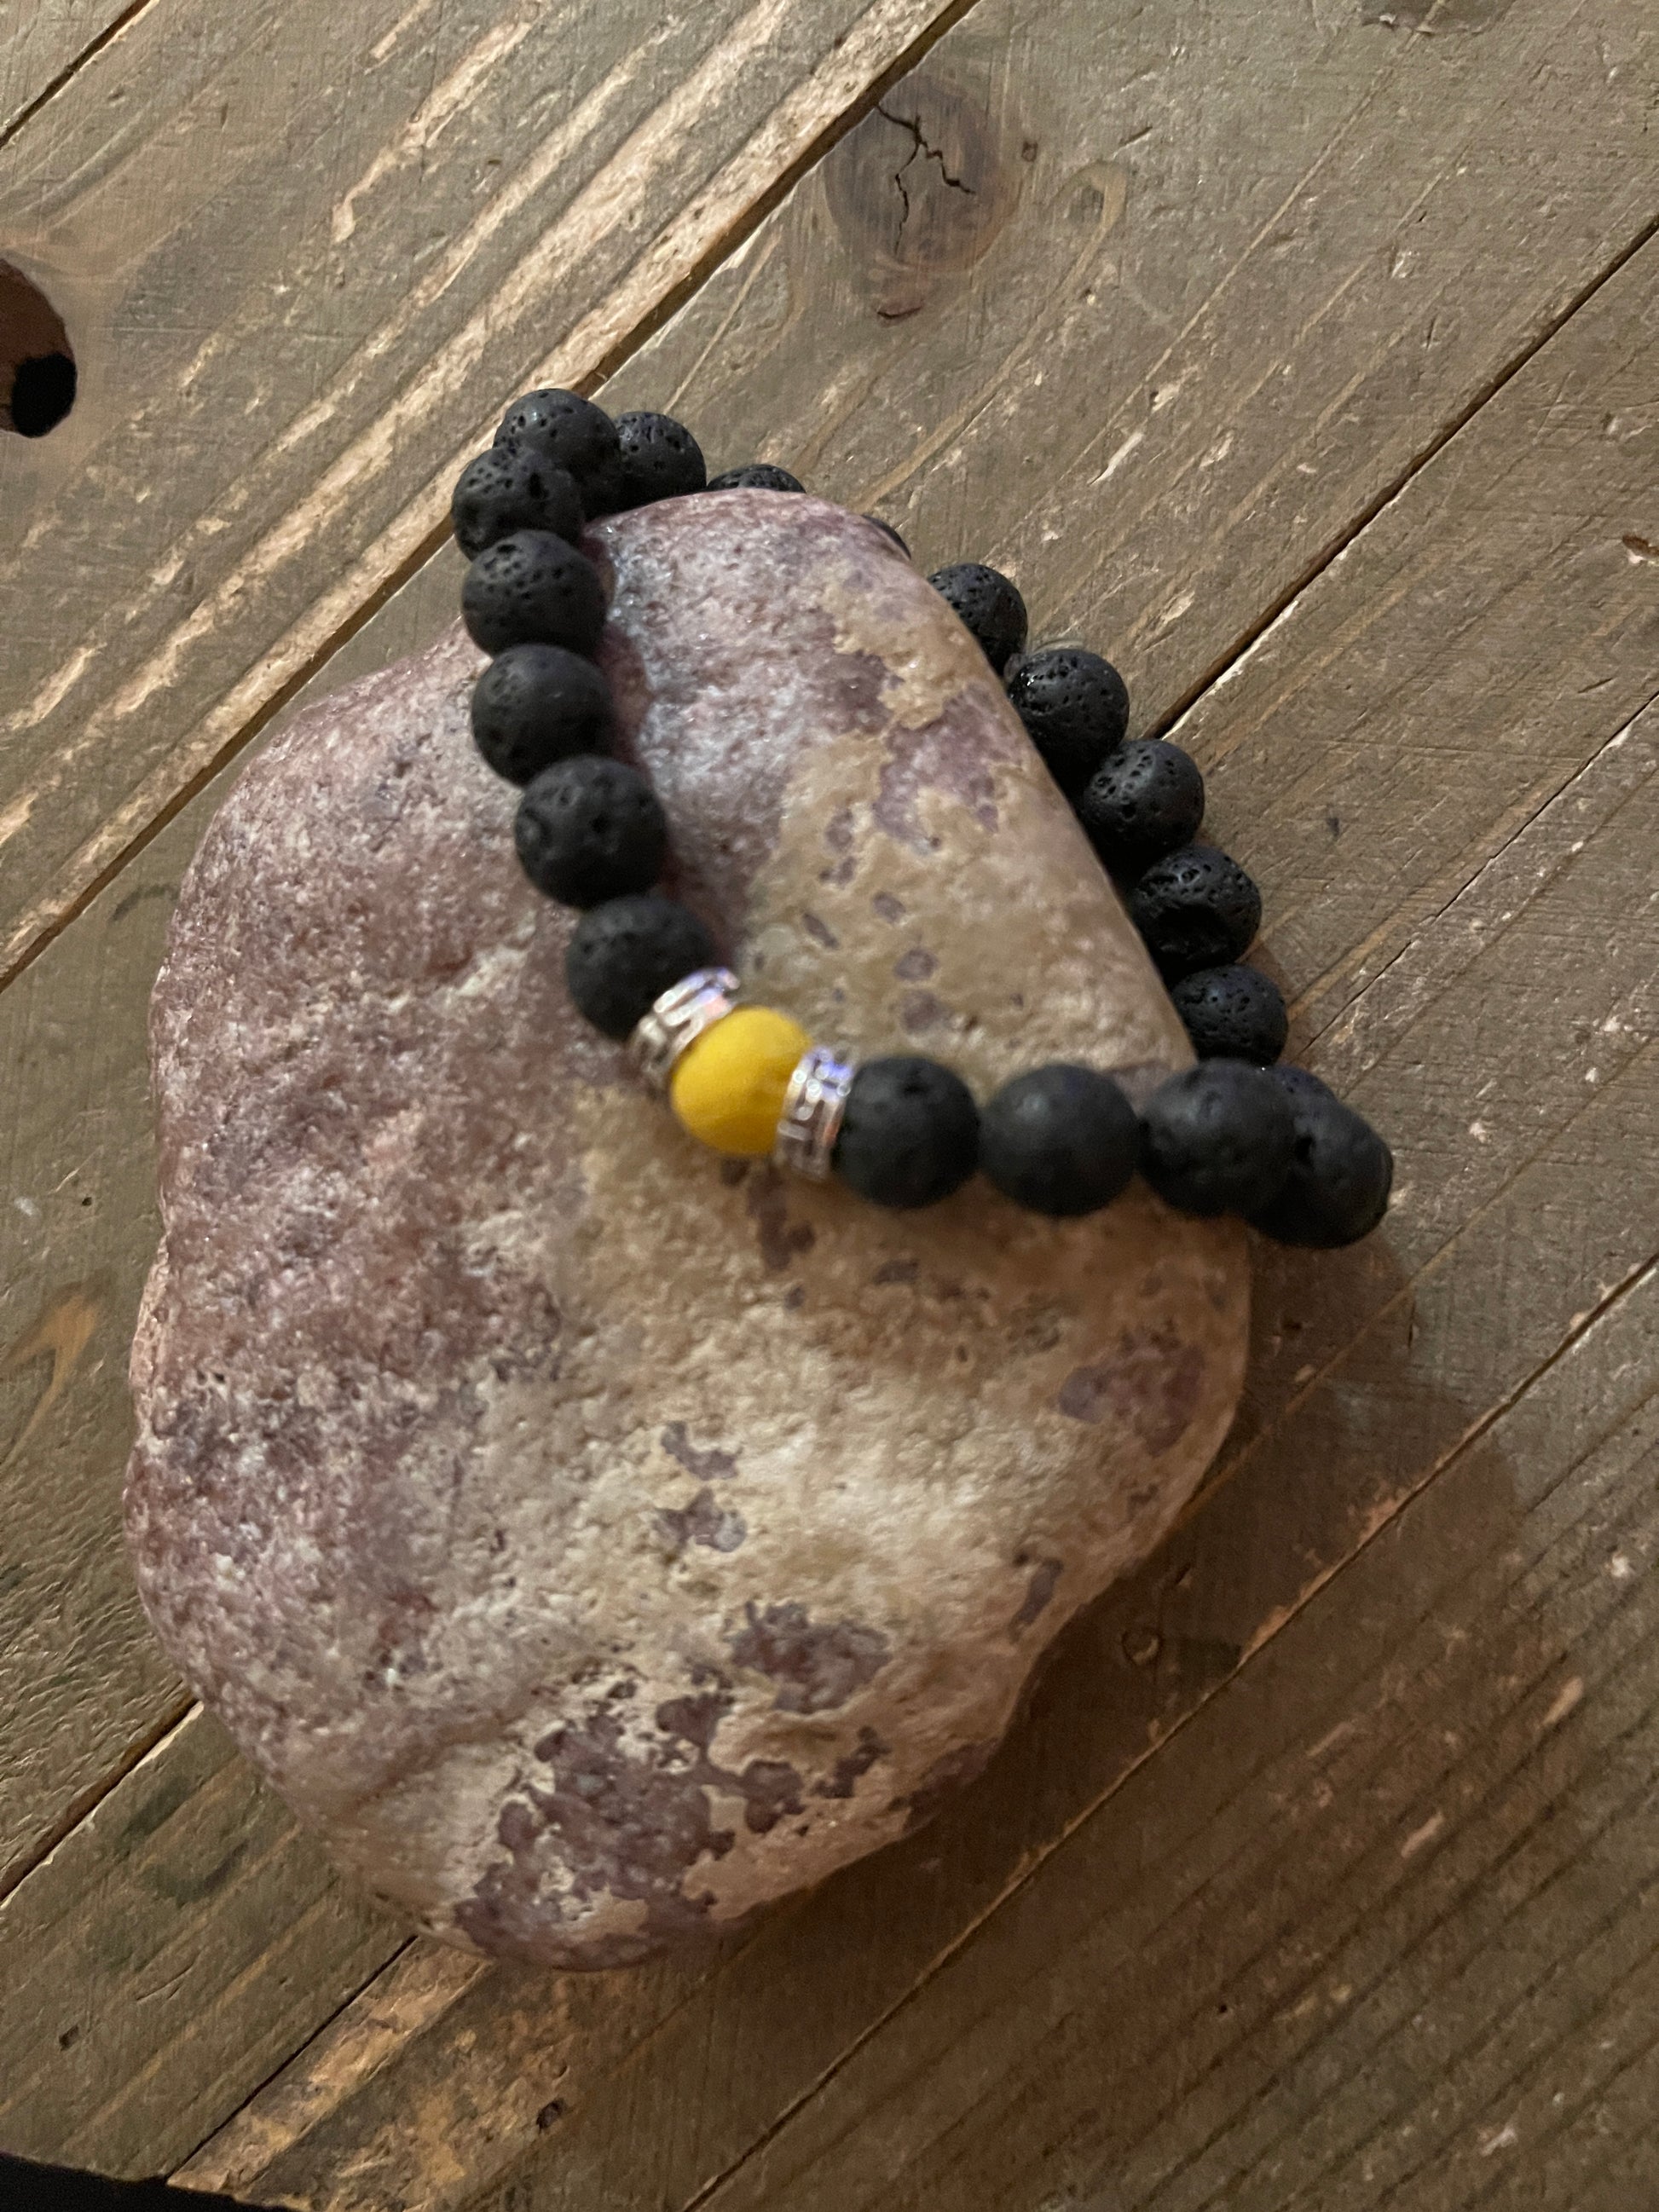 Black Lava Stone (8mm) with yellow Beaded Elastic/Stretch BraceletPink tiful of LOVE